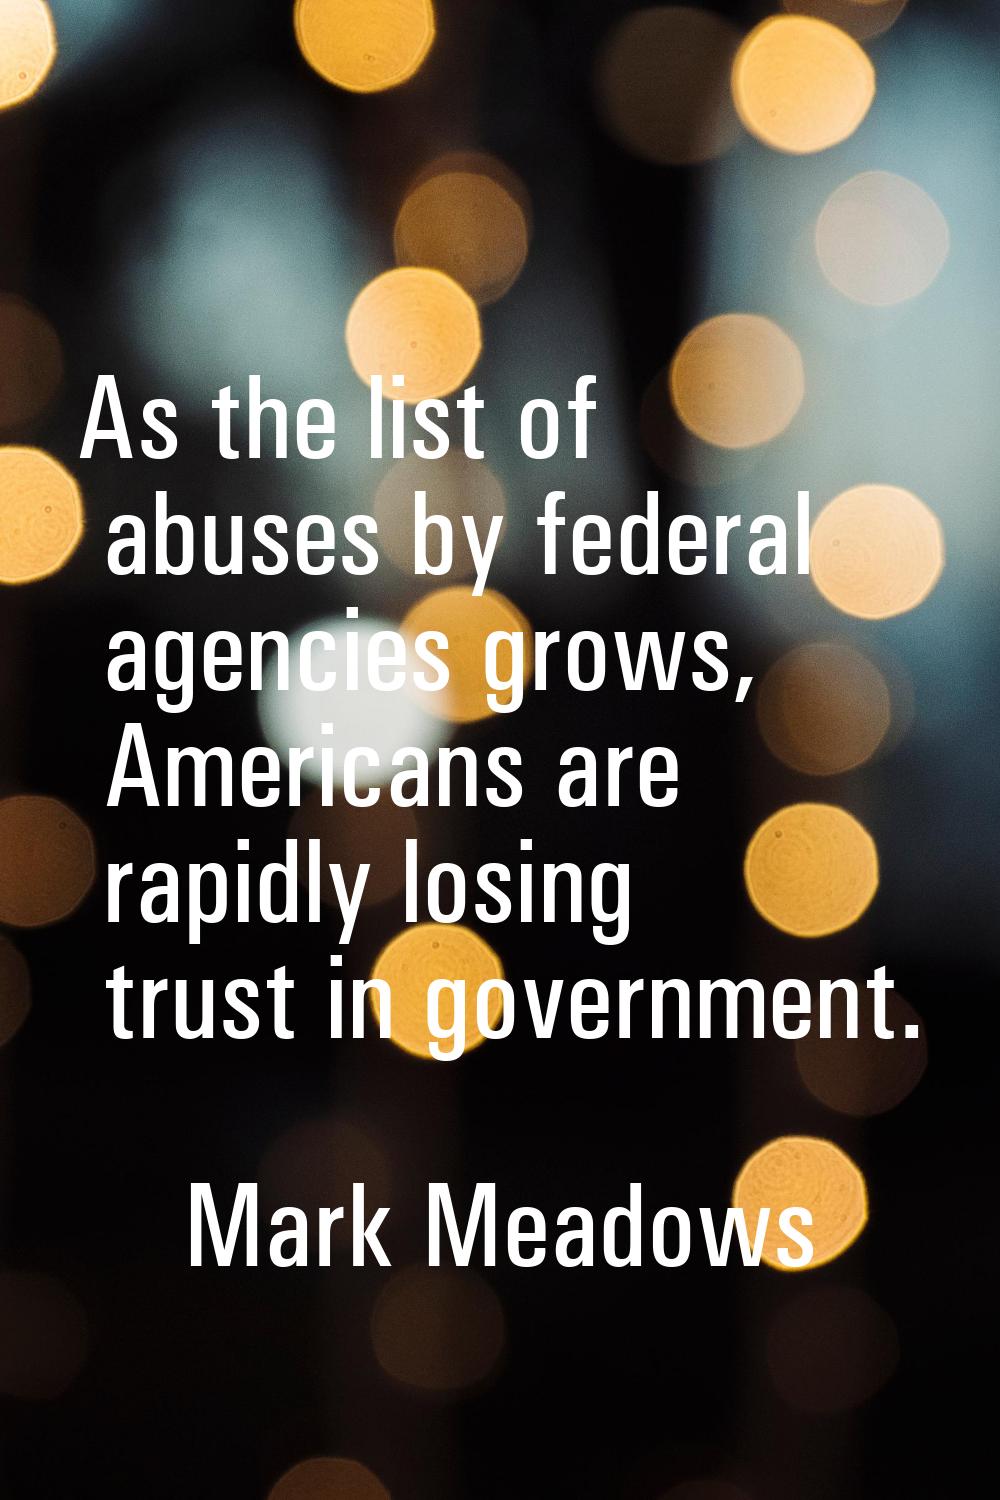 As the list of abuses by federal agencies grows, Americans are rapidly losing trust in government.